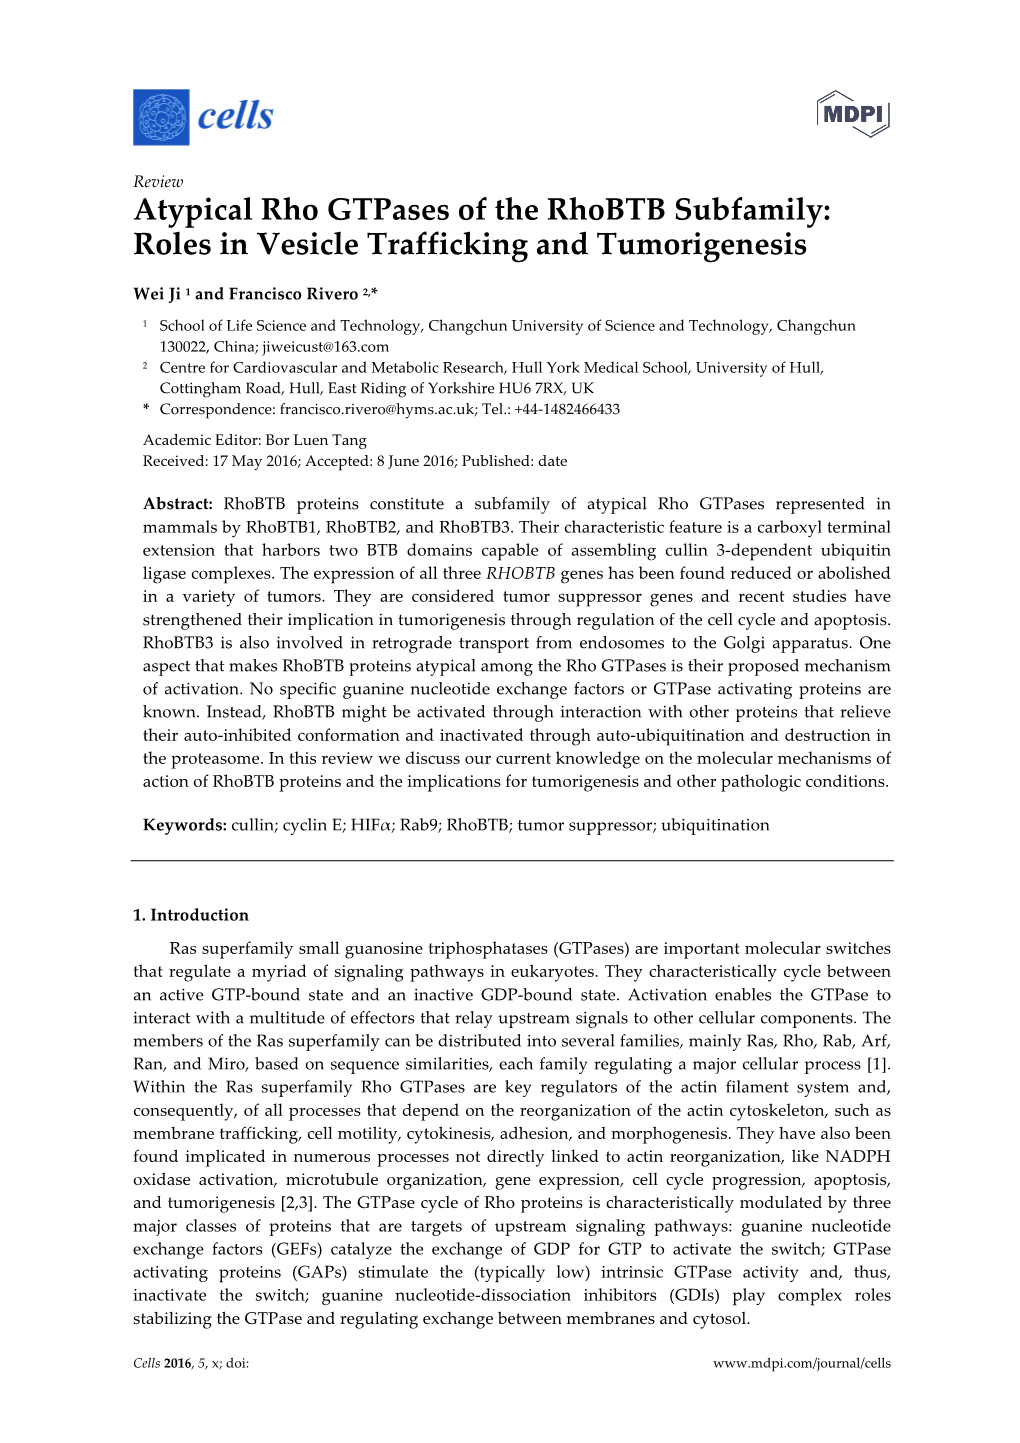 Atypical Rho Gtpases of the Rhobtb Subfamily: Roles in Vesicle Trafficking and Tumorigenesis